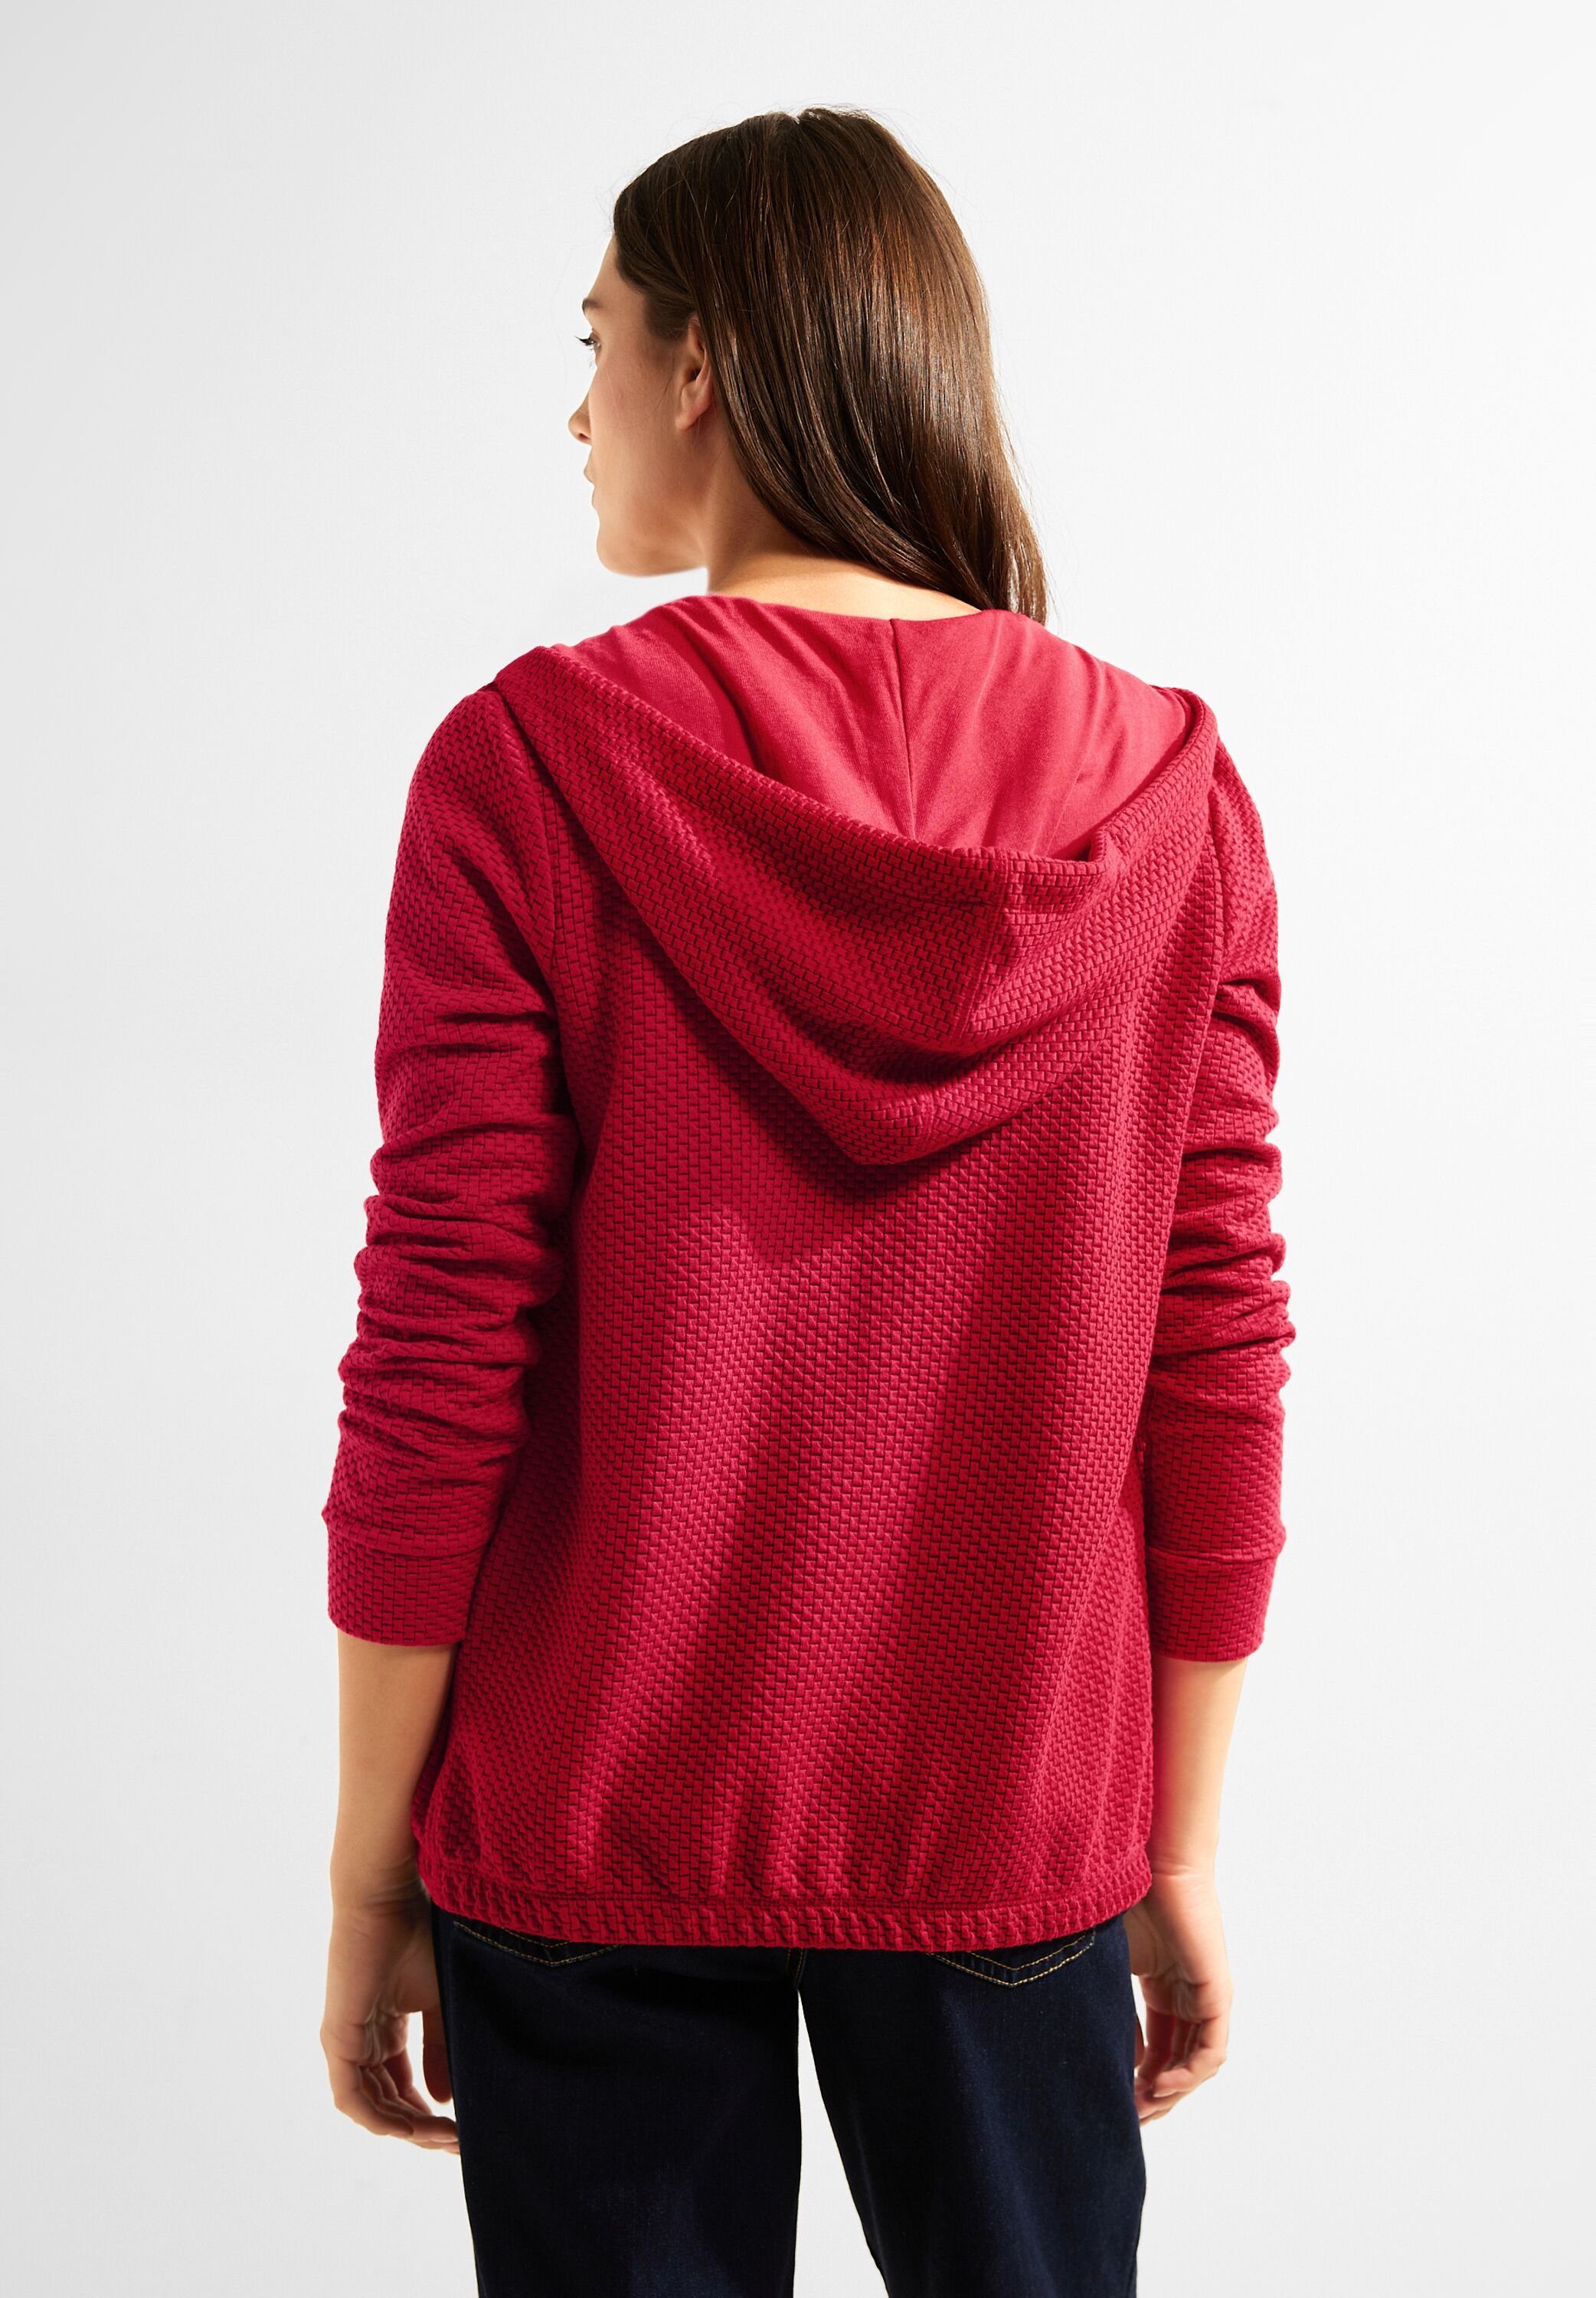 Struktur Shirtjacke red mit Cecil casual